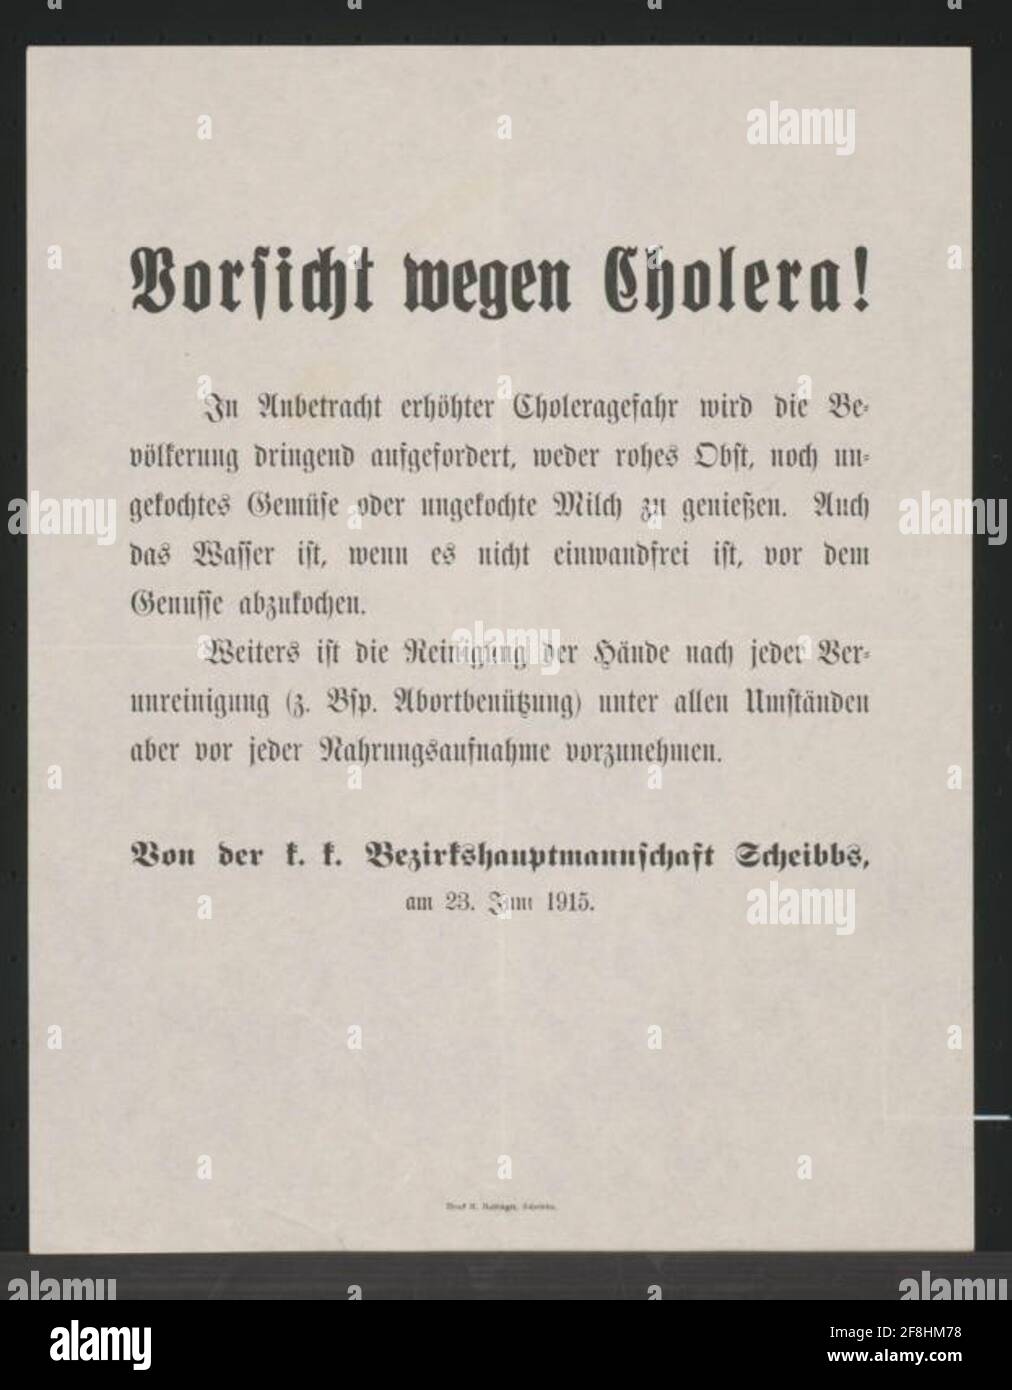 Caution because of cholera! - Scheibbs measures against cholera - food to avoid - hygiene measures - from the K. k. District Team Scheibbs, on June 23, 1915 Stock Photo